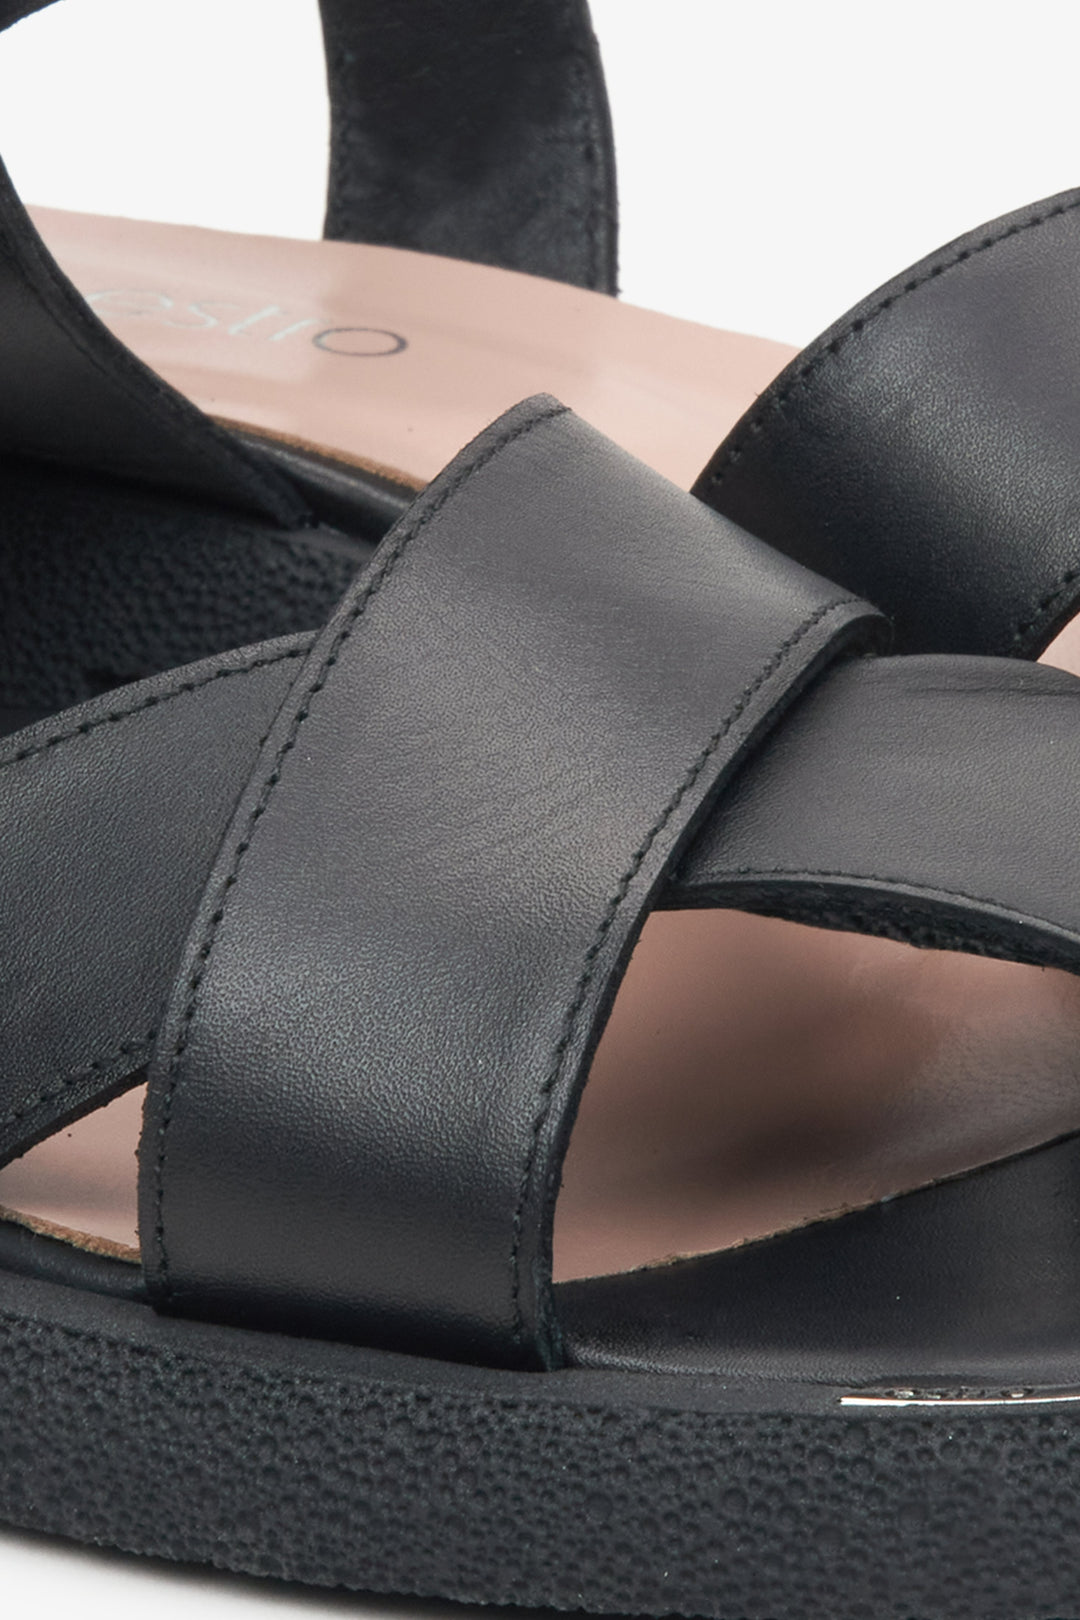 Women's black leather sandals by Estro - close-up on the details.